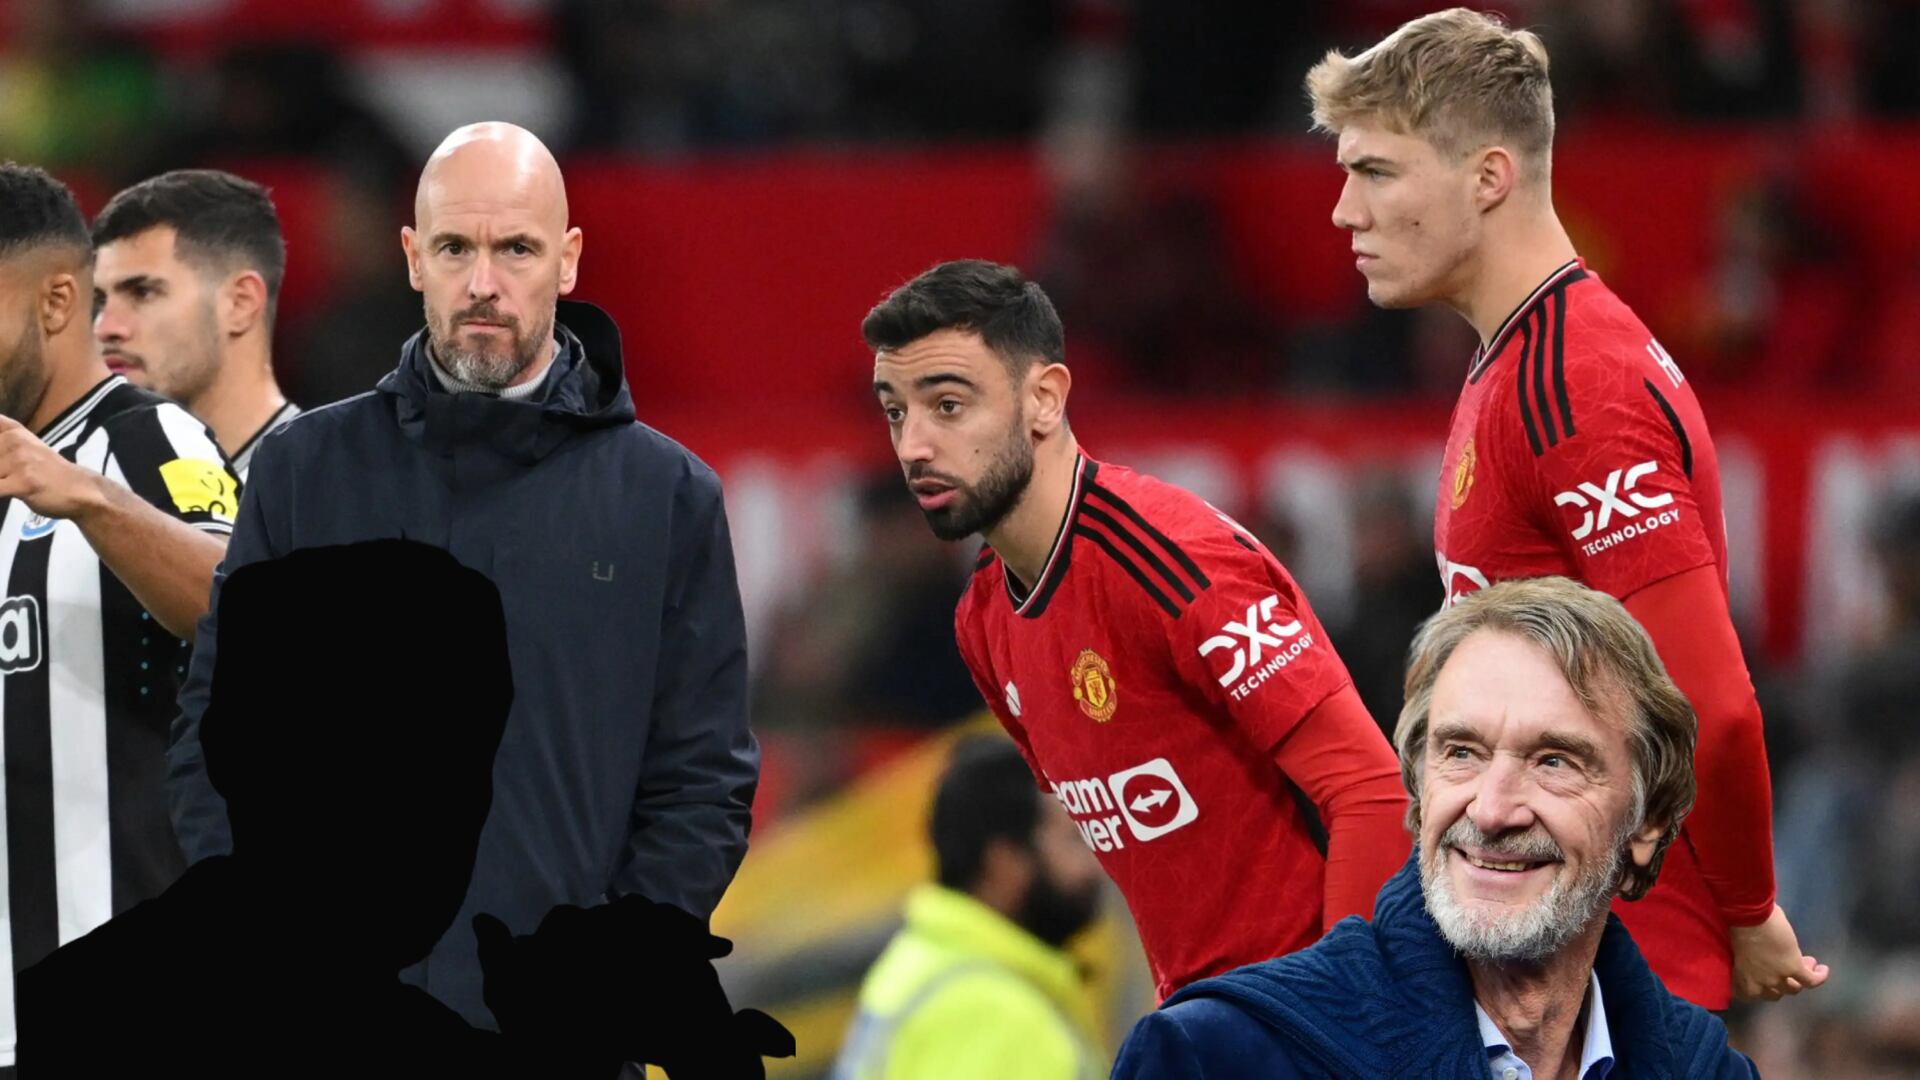 Shocking, Ratcliffe to replace Ten Hag with an English coach at Man United